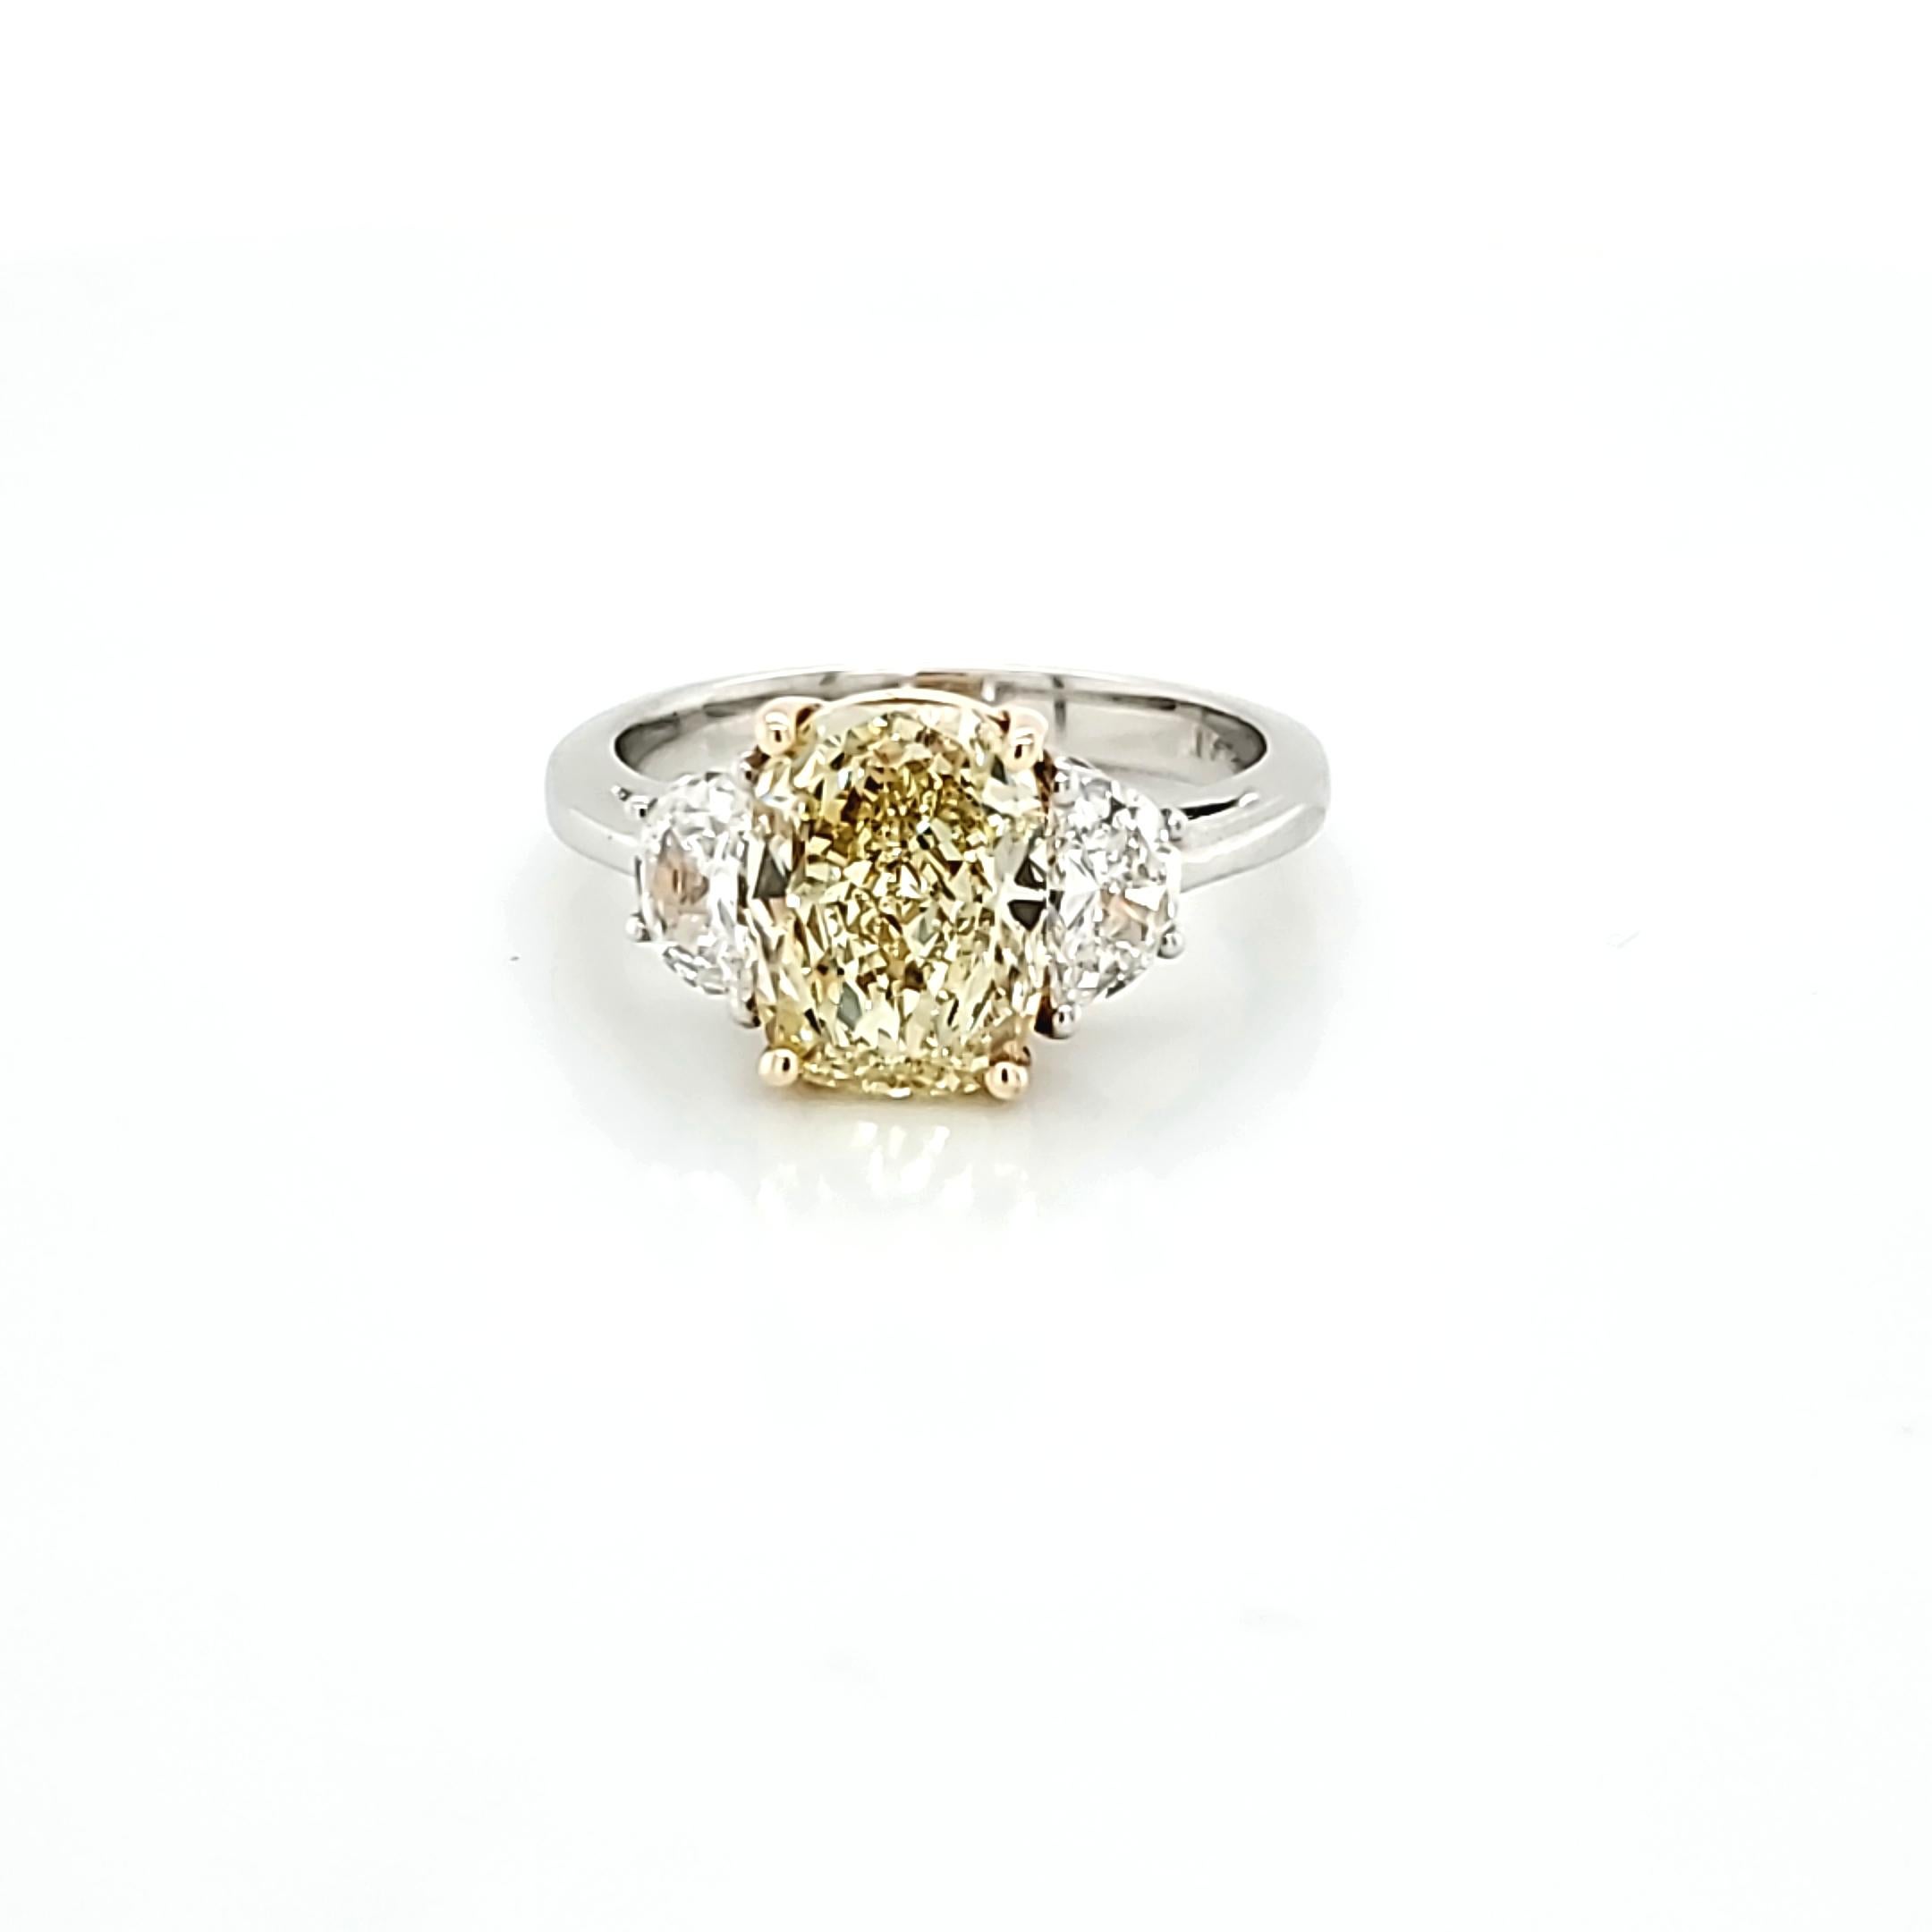 Center stone is a 2.80 carat cushion cut diamond. Fancy Yellow in color and VS1 in clarity. The 2 half moon shaped diamonds weigh 0.73 carats total and are E color and VS2 clarity. Set in a platinum and 18k yellow gold ring. Finger size is currently